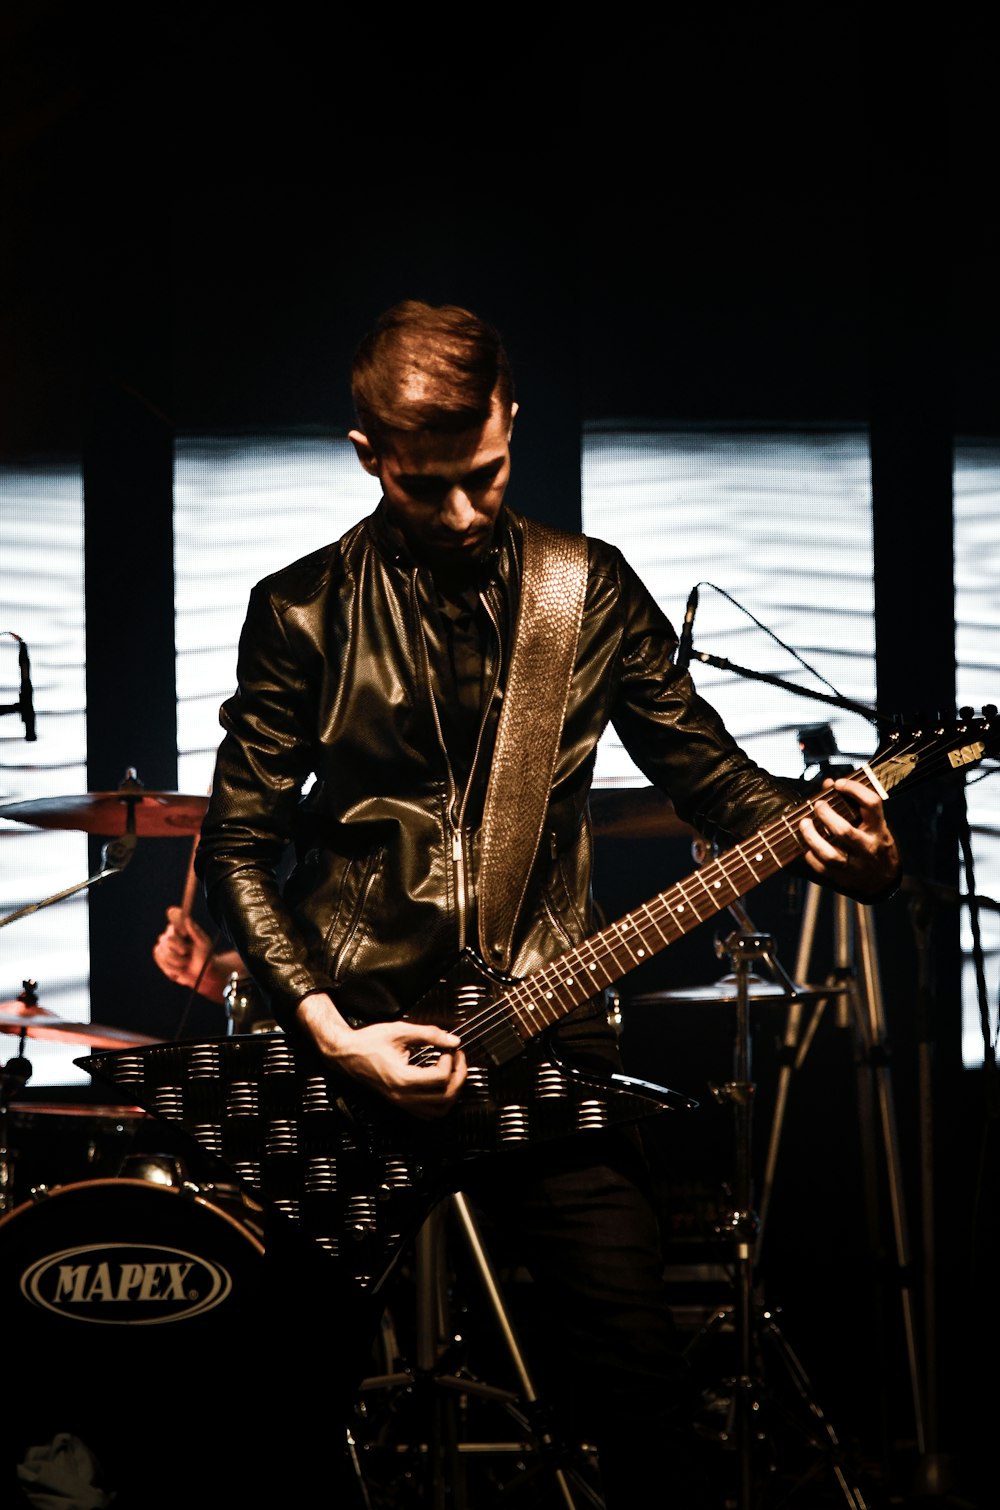 man in black leather jacket playing guitar